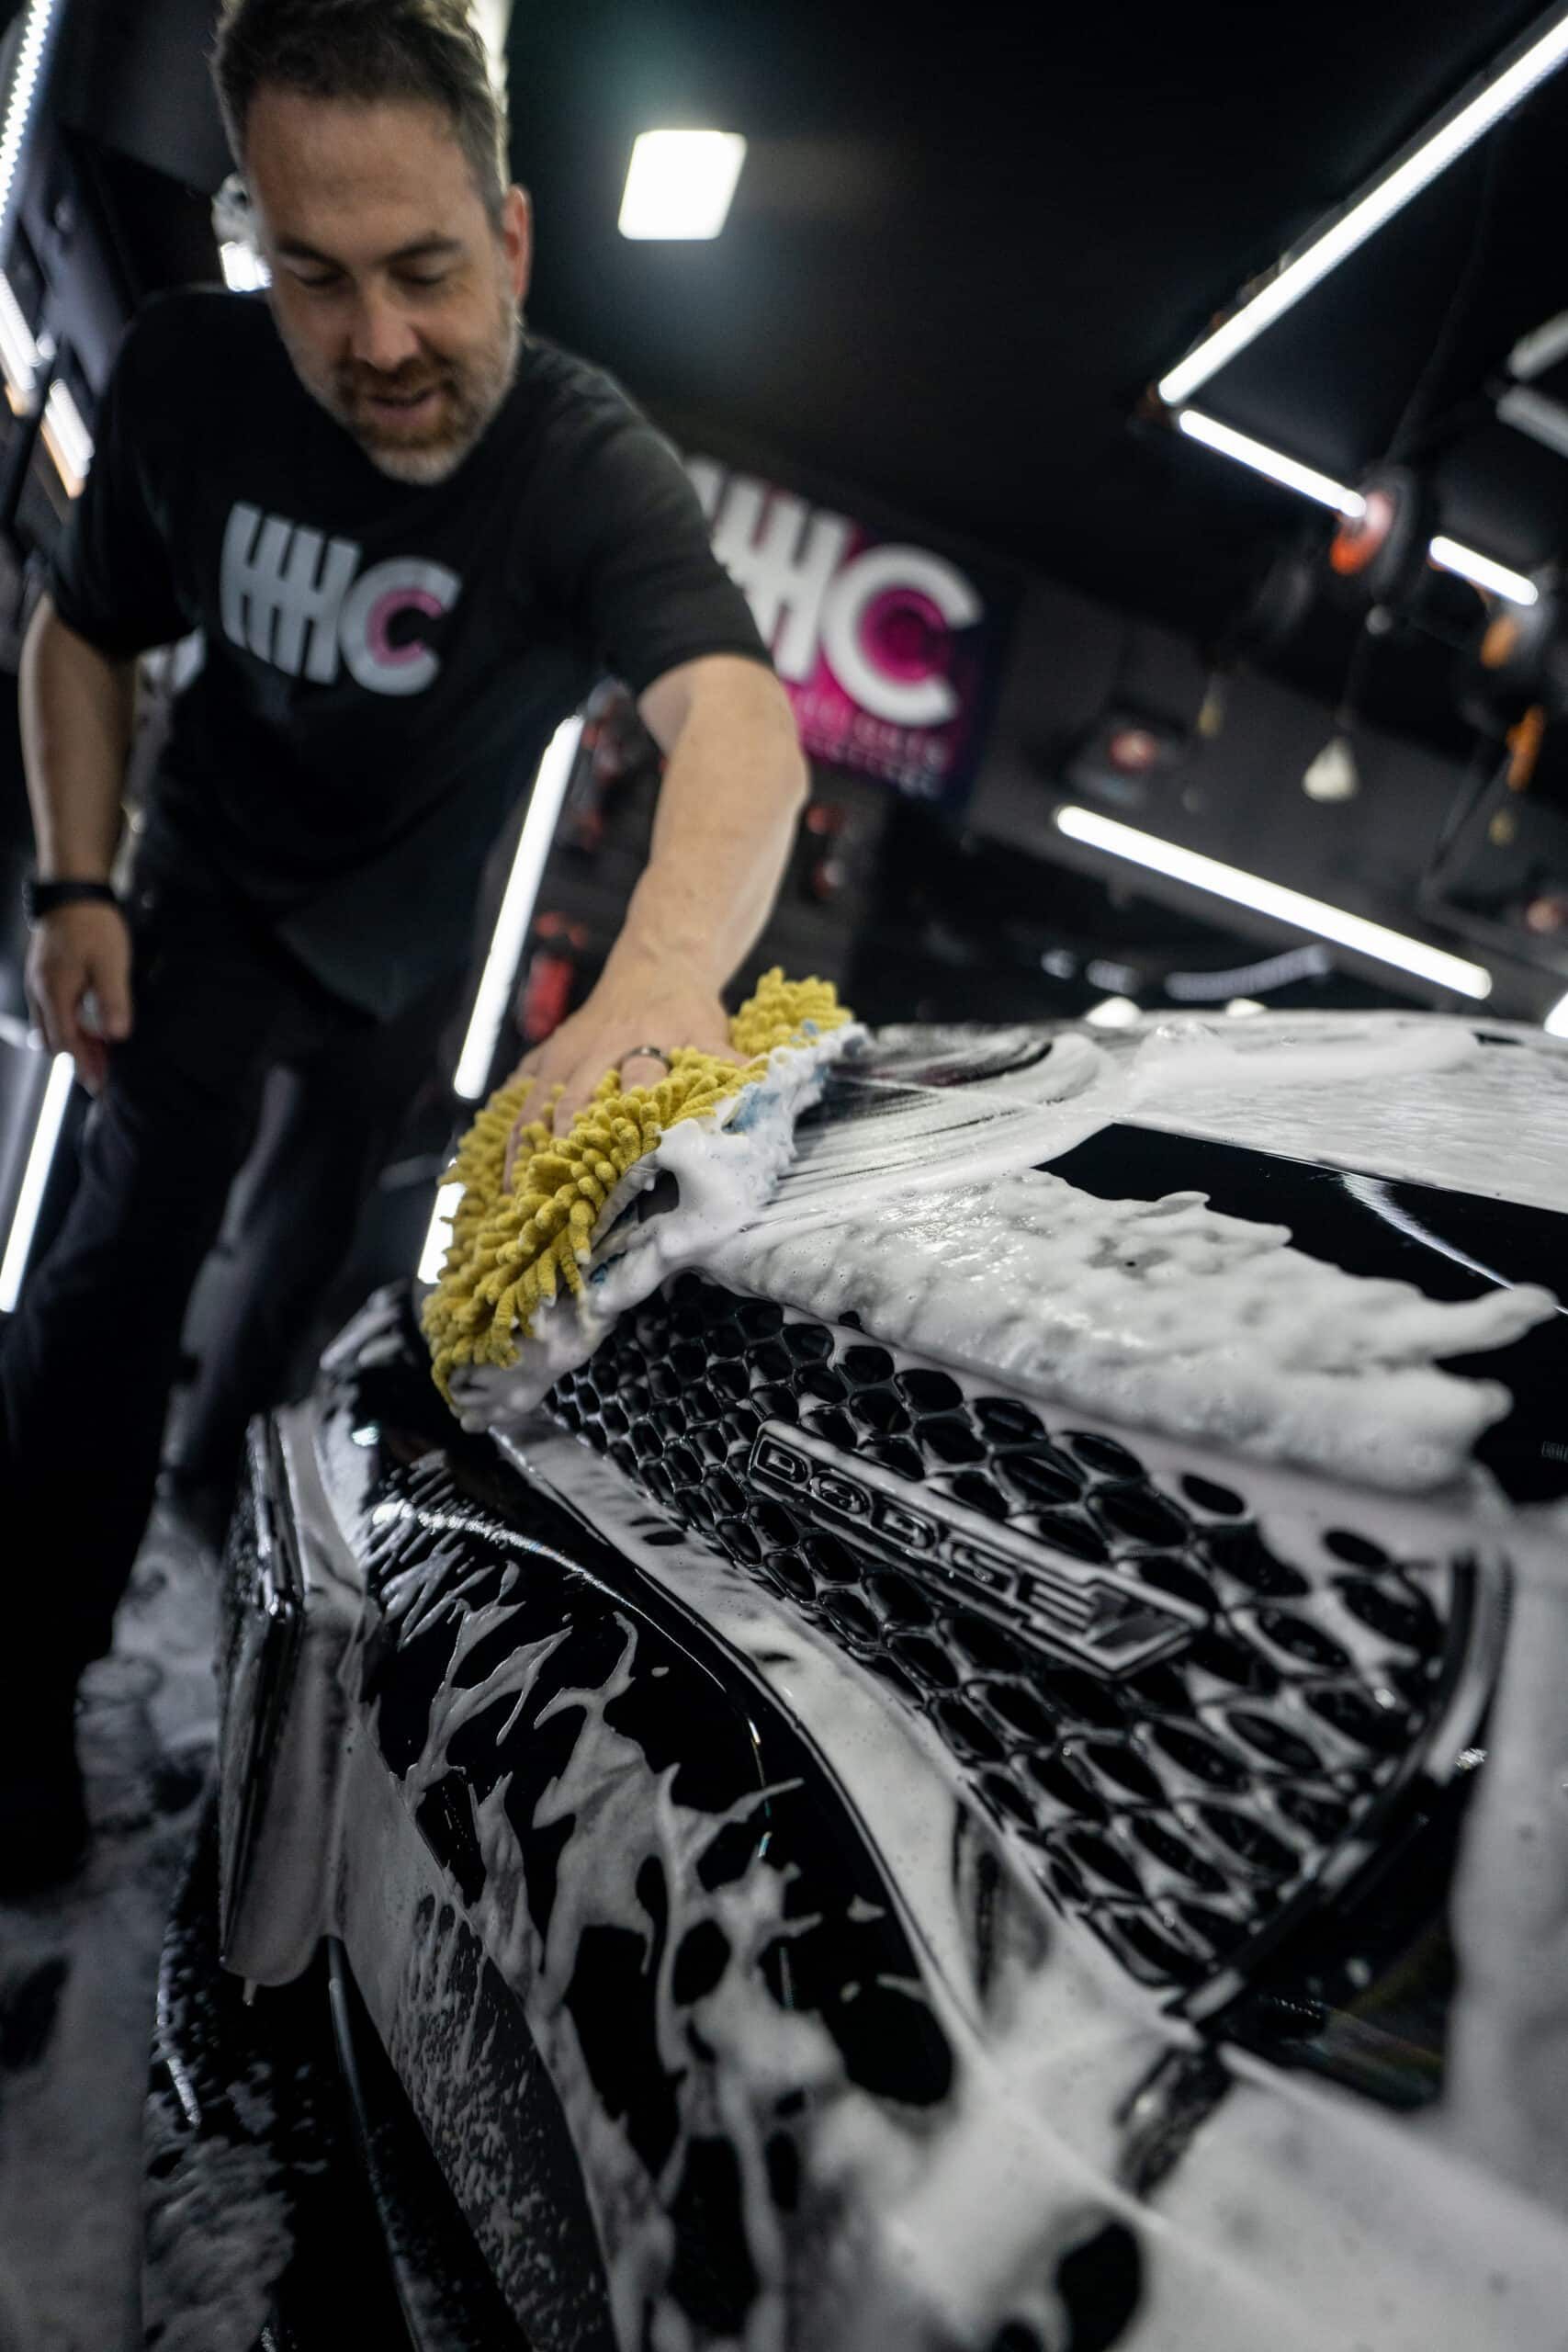 A man is washing a black and white car with a yellow sponge.